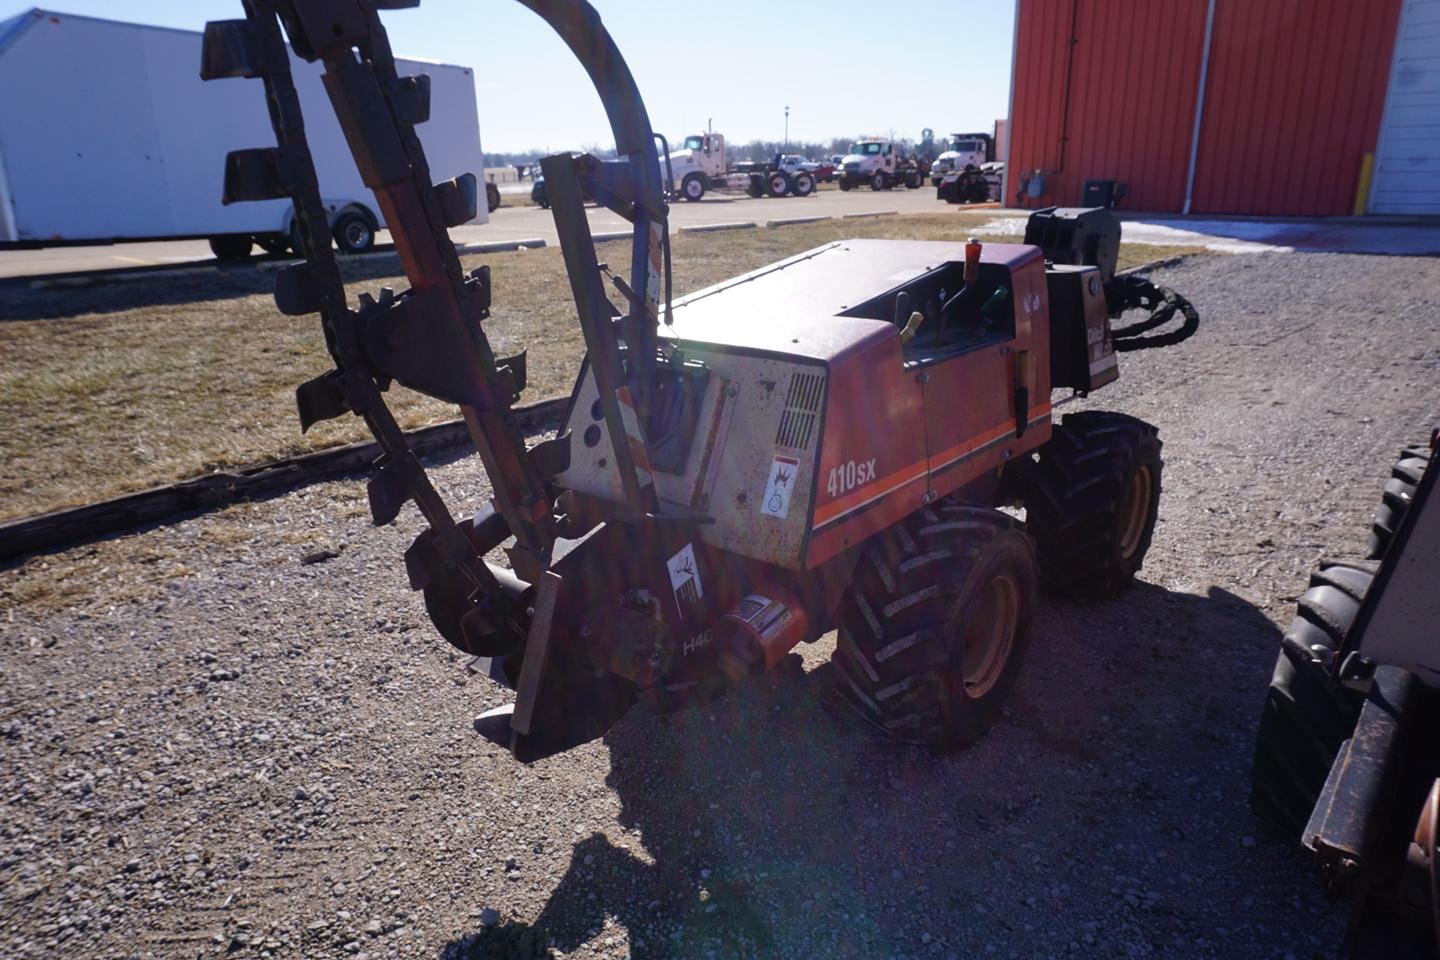 Ditch Witch Model 410 SX Walk Behind Trencher & Vibratory Plow Combo Unit, SN#4P0612, 1,756 Hours, L